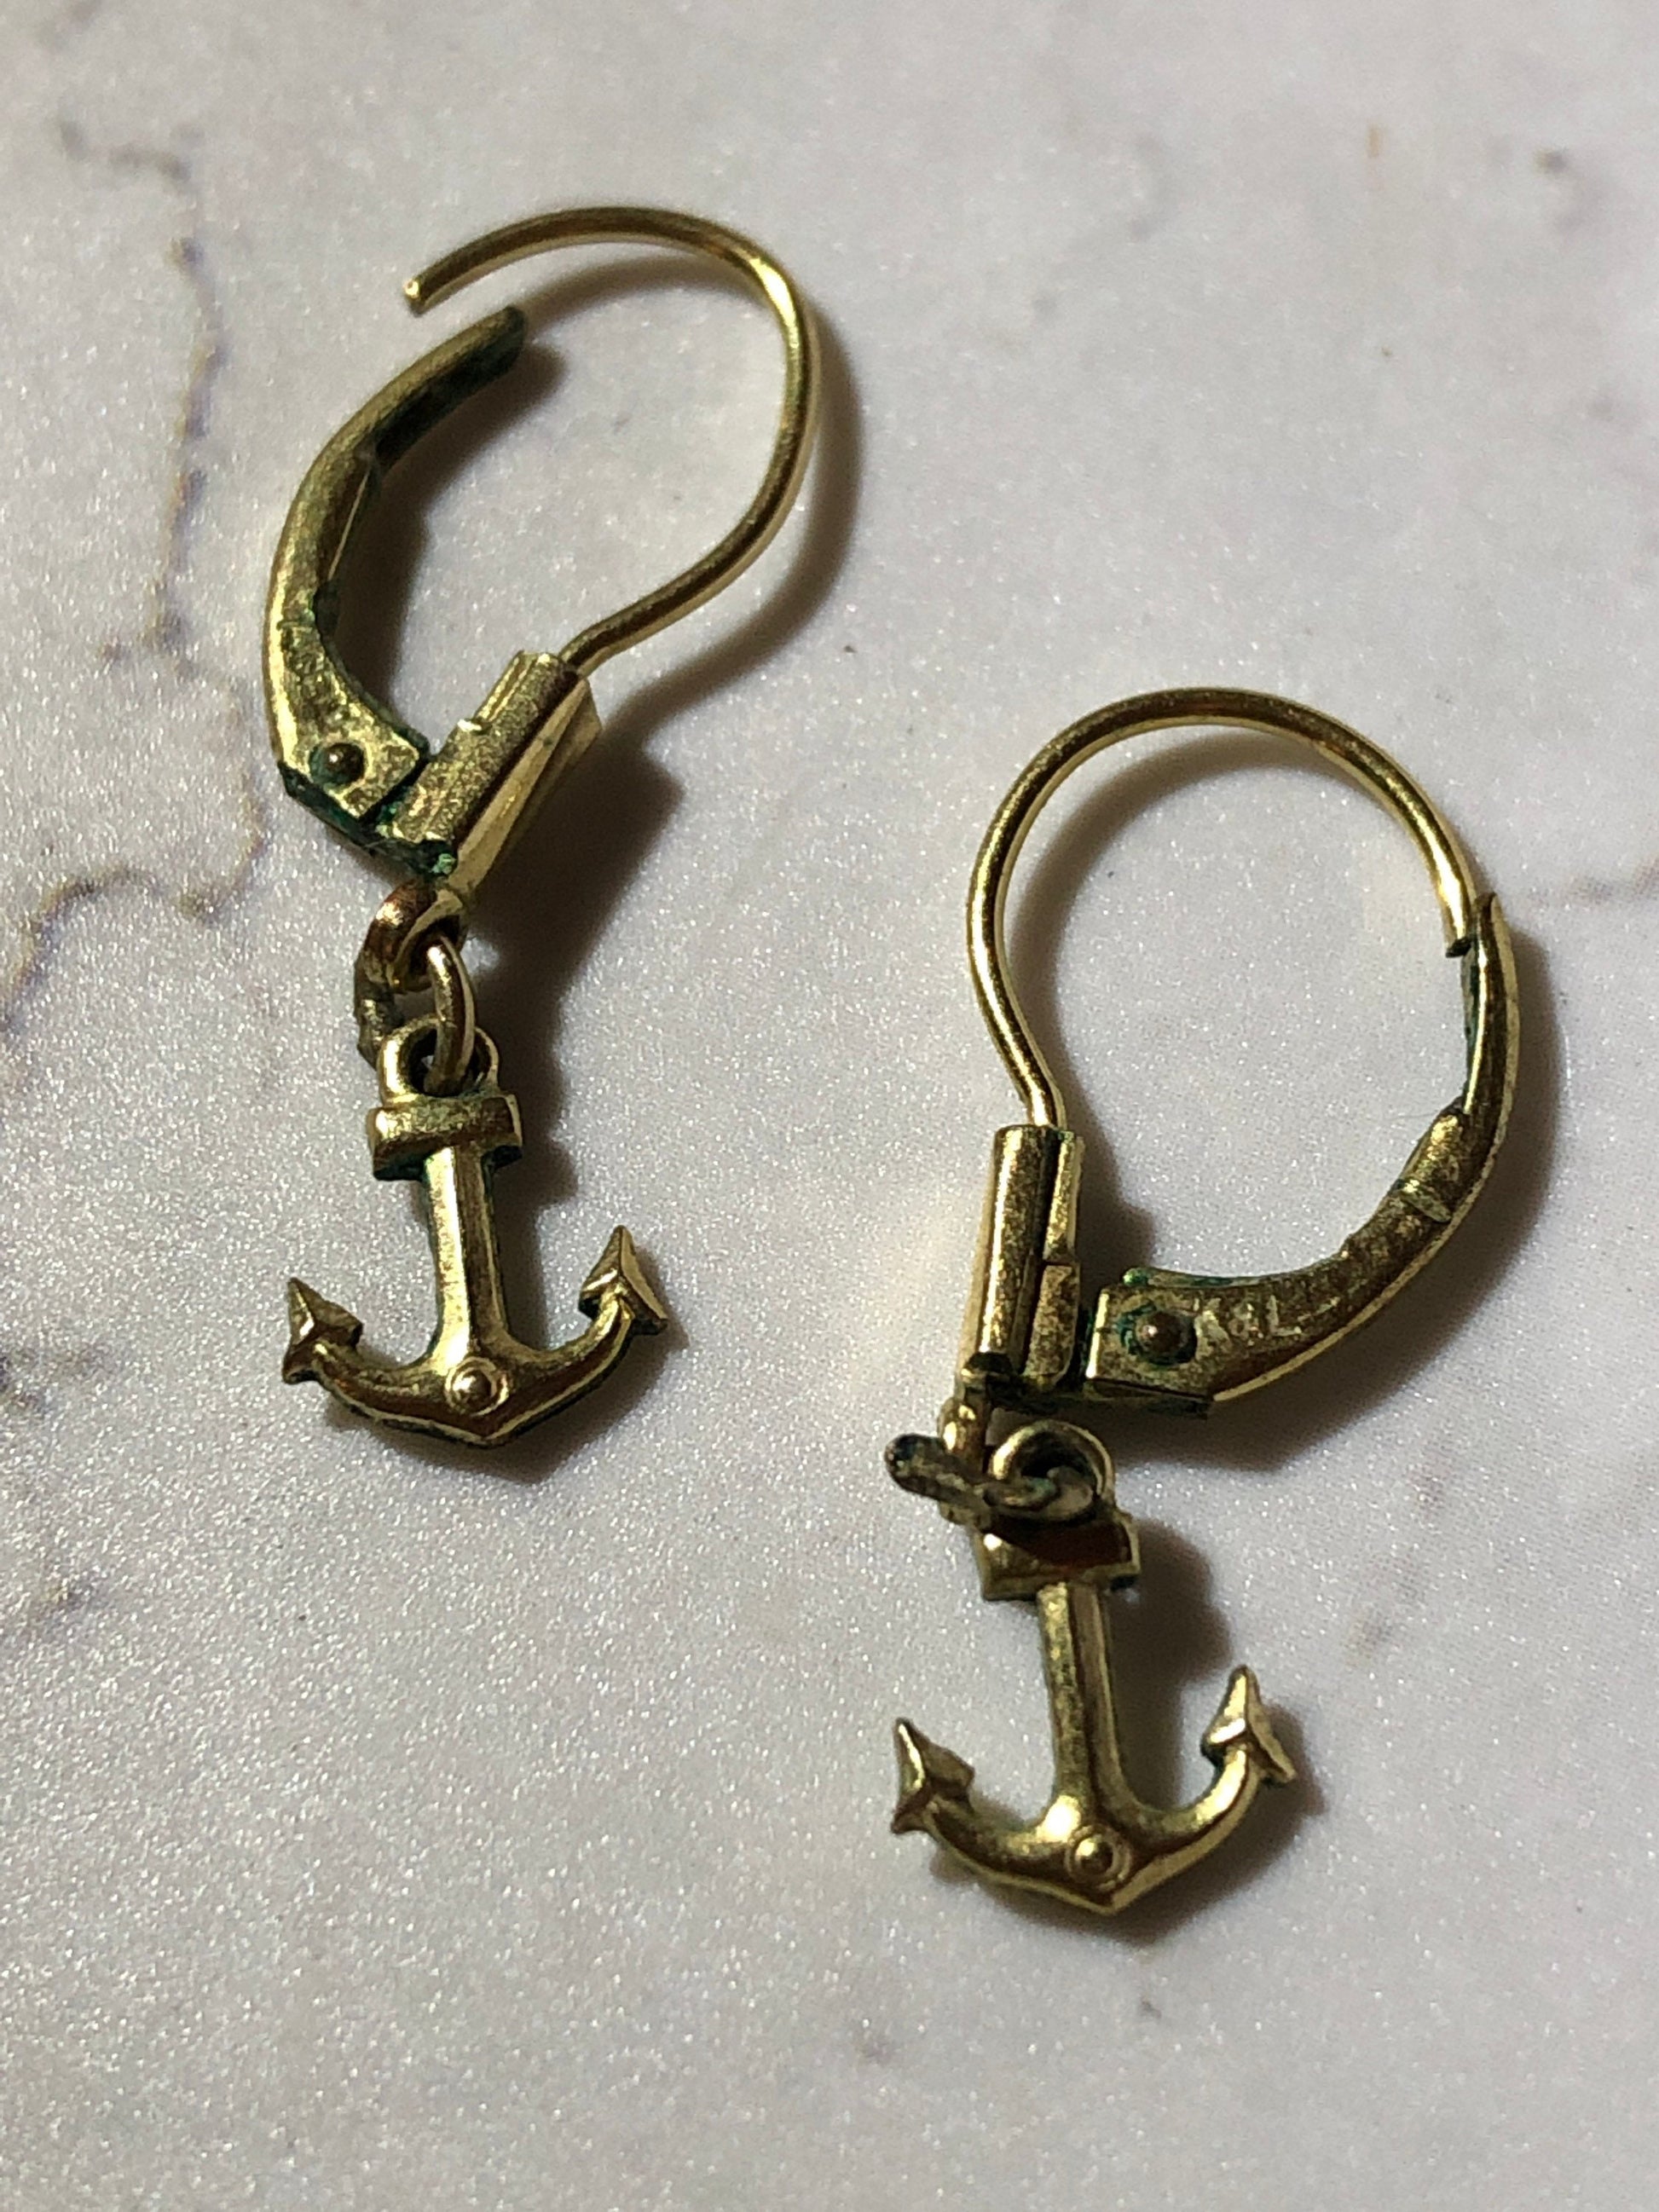 RG retro rolled gold small drop dropper anchor earrings for pierced ears